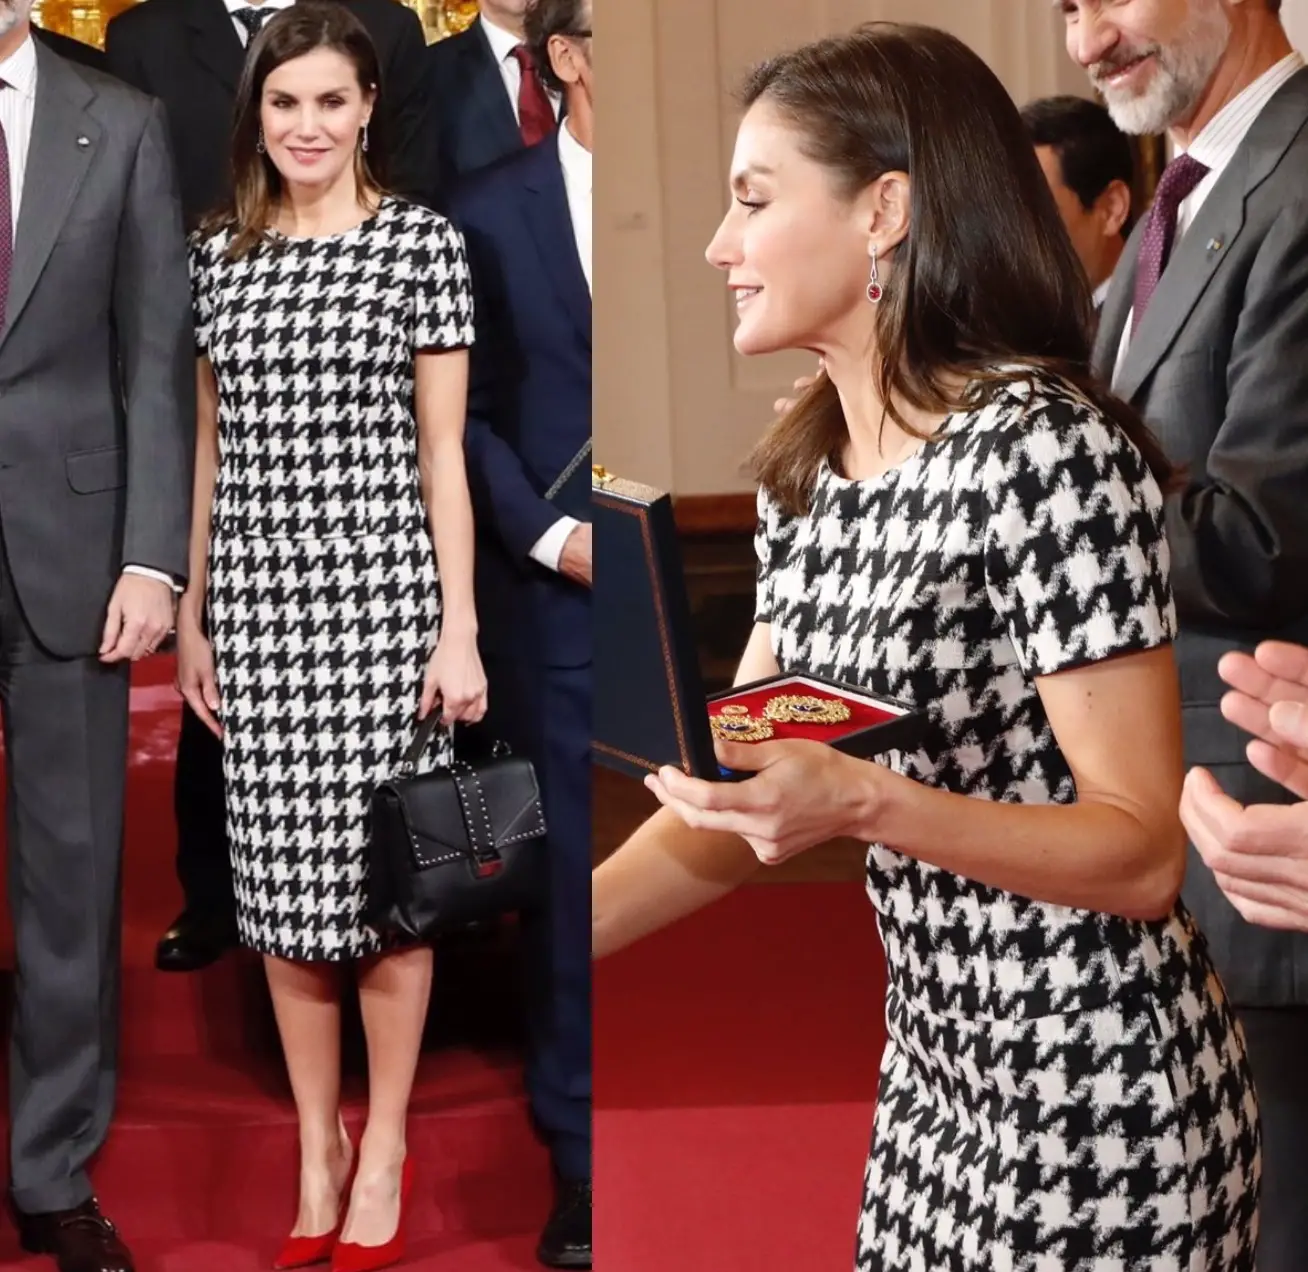 Queen Letizia of Spain wore Hugo Riami Houndstooth Pencil Skirt with Clady Houndstooth Top at the presentation of Gold Merits